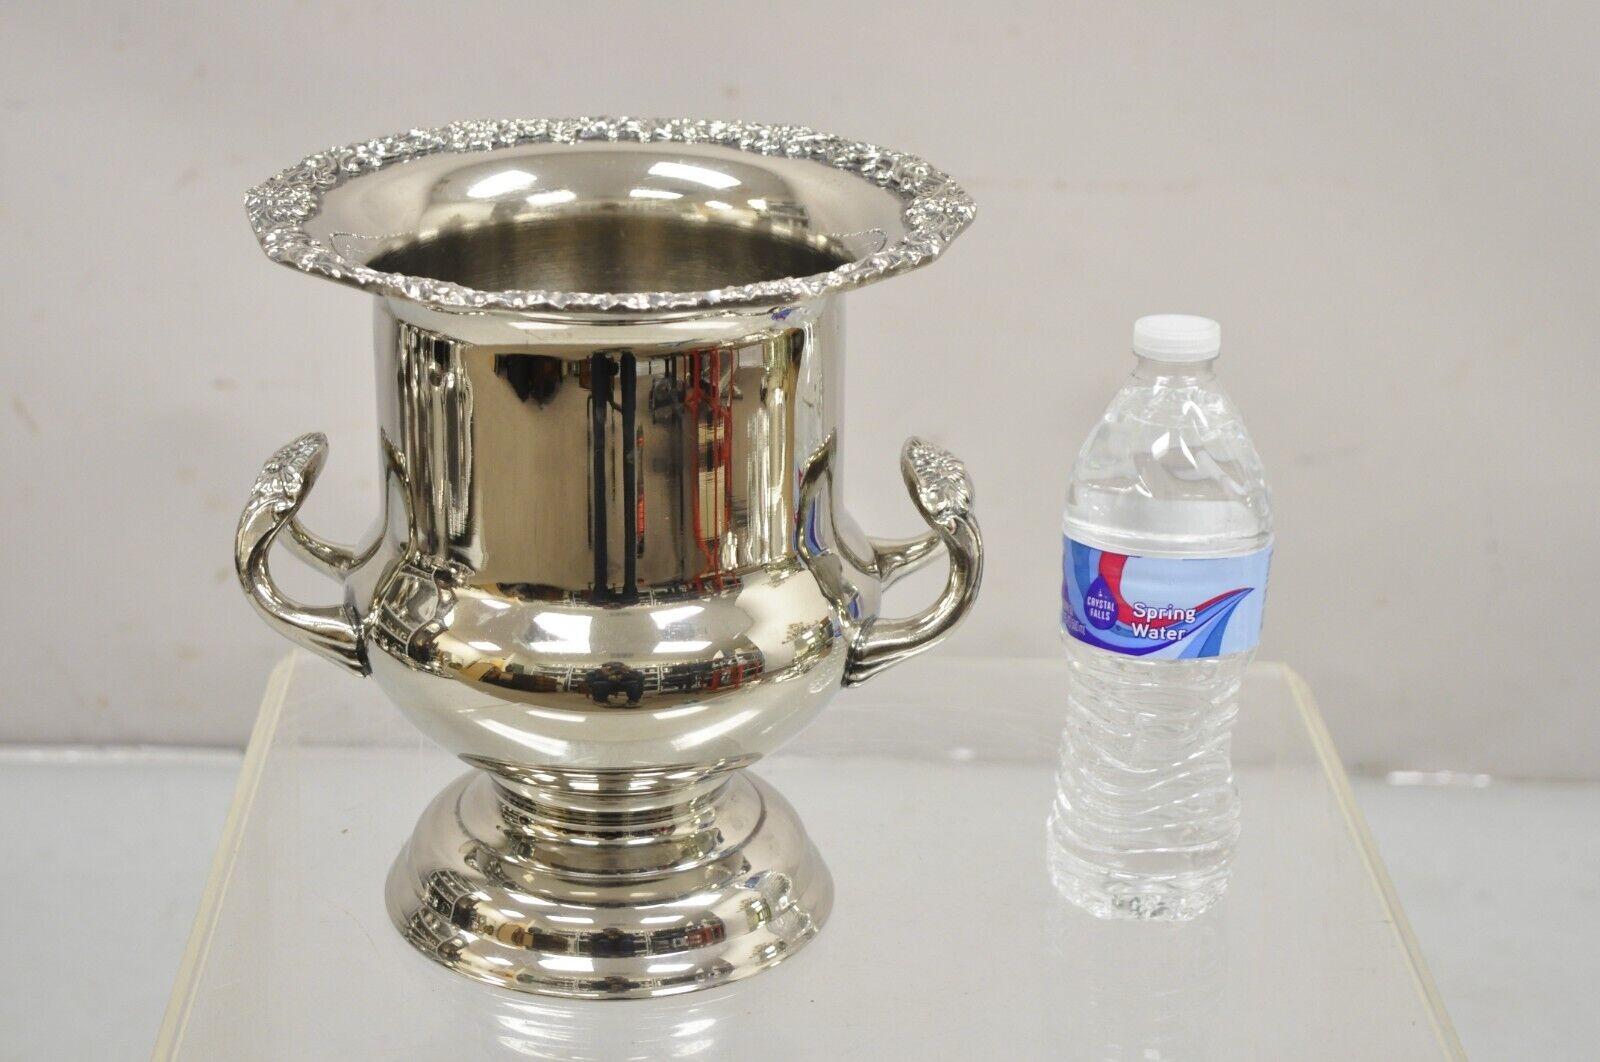 Vintage Victorian Style Silver Plated Potbelly Trophy Cup Champagne Chiller Ice Bucket. Circa Late 20th Century. Measurements: 9.5